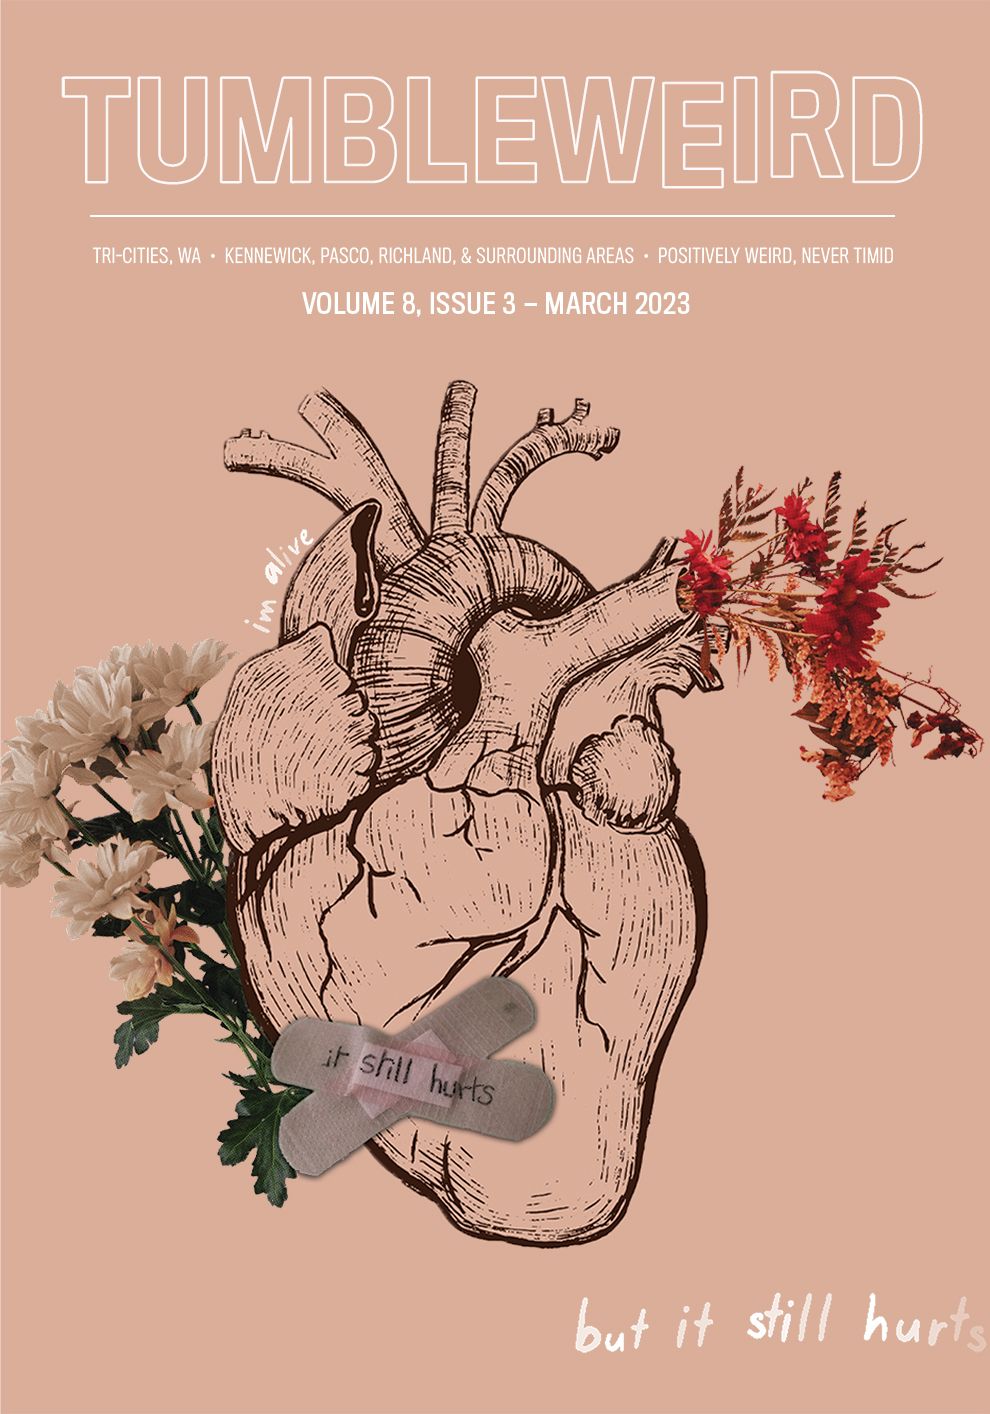 Tumbleweird cover: Illustration of a human heart with sprays of flowers and the words: "I'm alive" "But it still hurts"